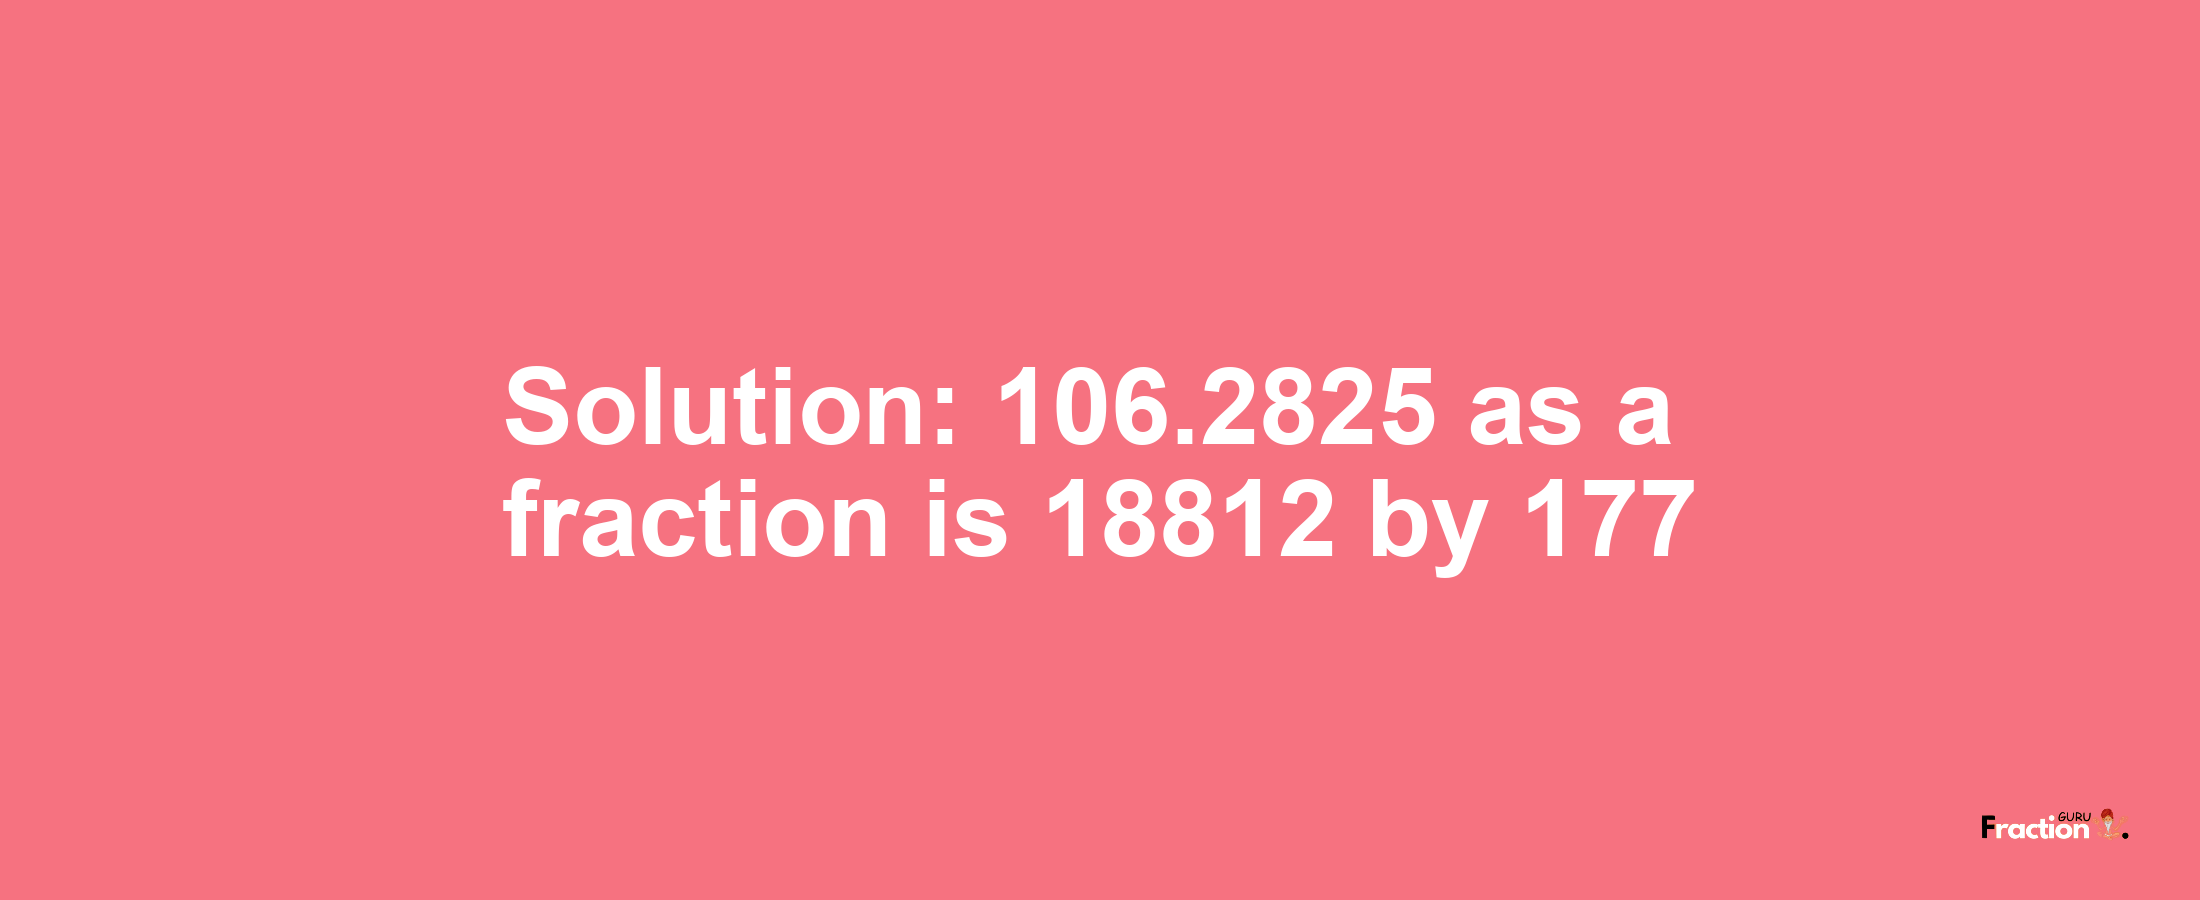 Solution:106.2825 as a fraction is 18812/177